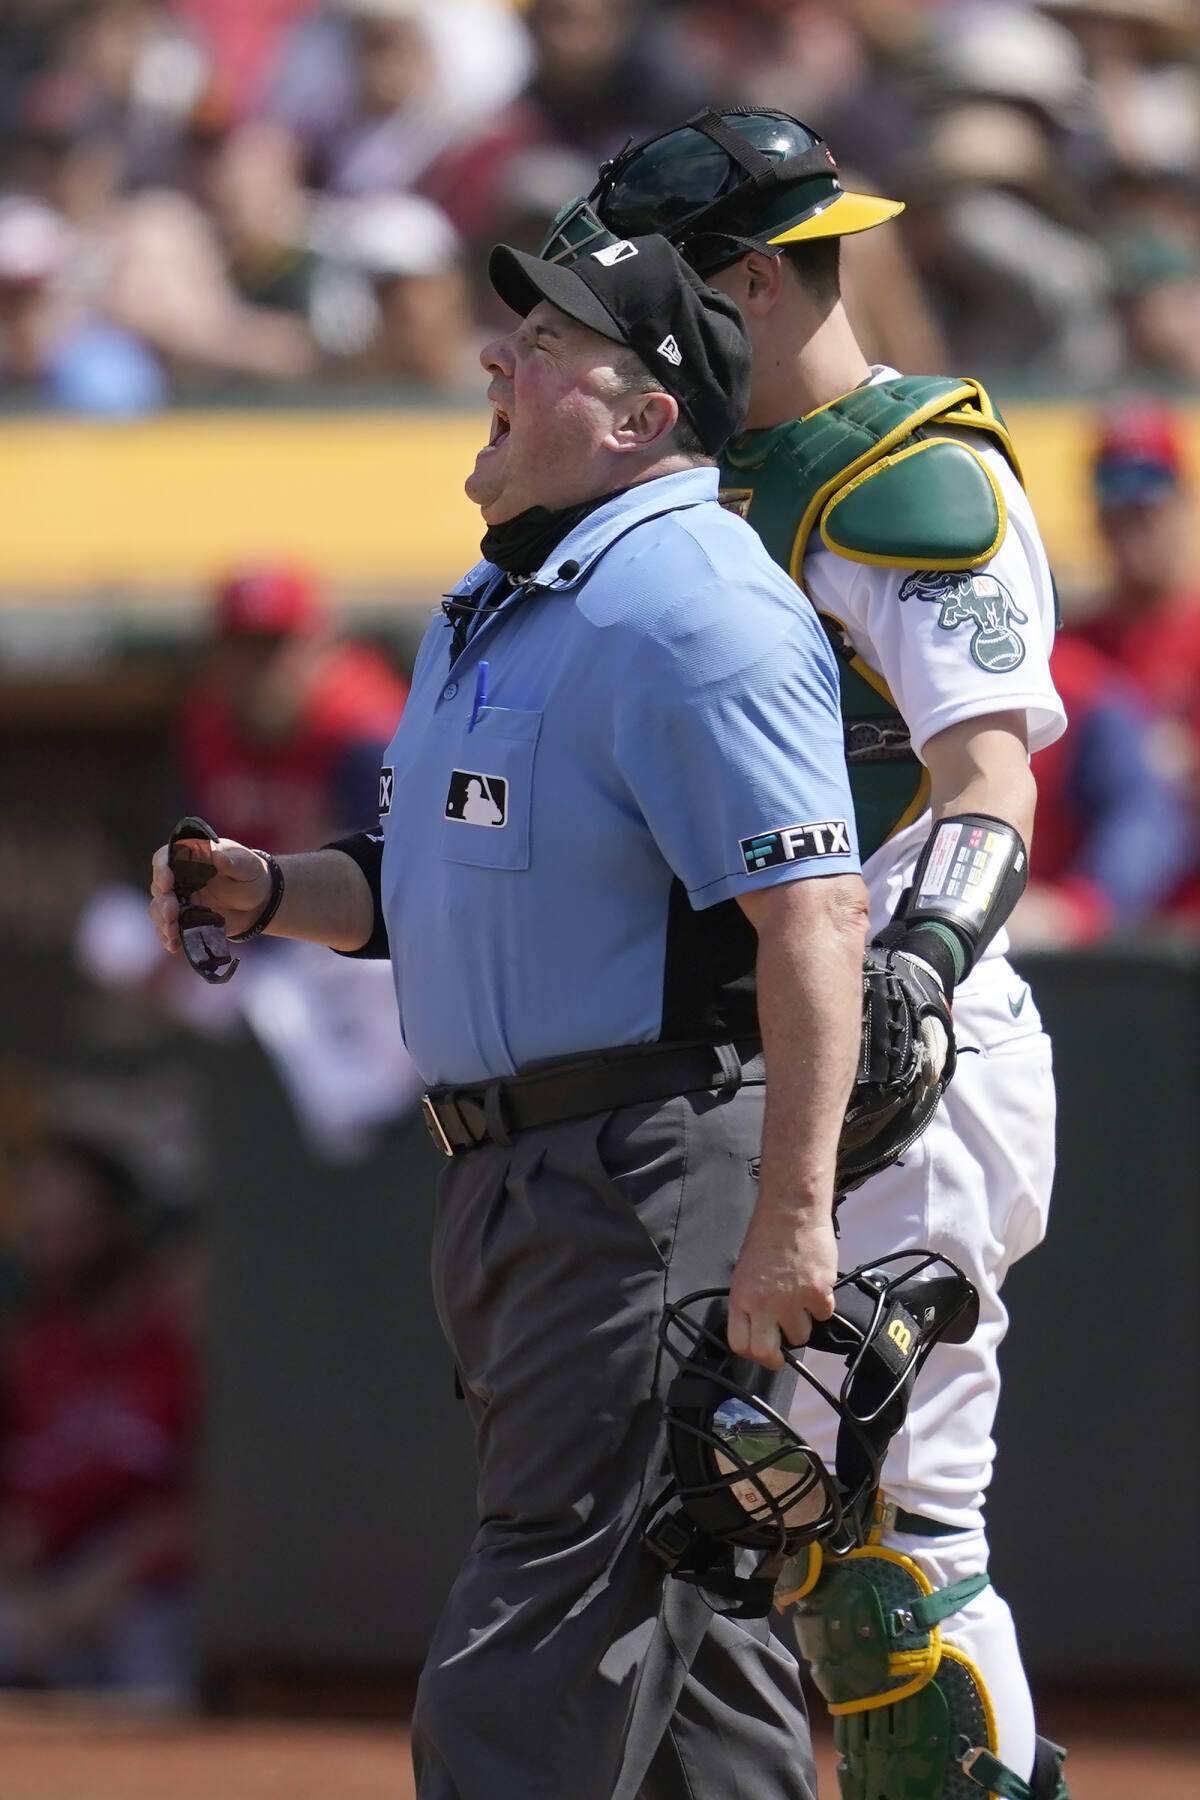 Ejected! Umpire gets in Jeremy Peña's face during at bat … here's what  happened next